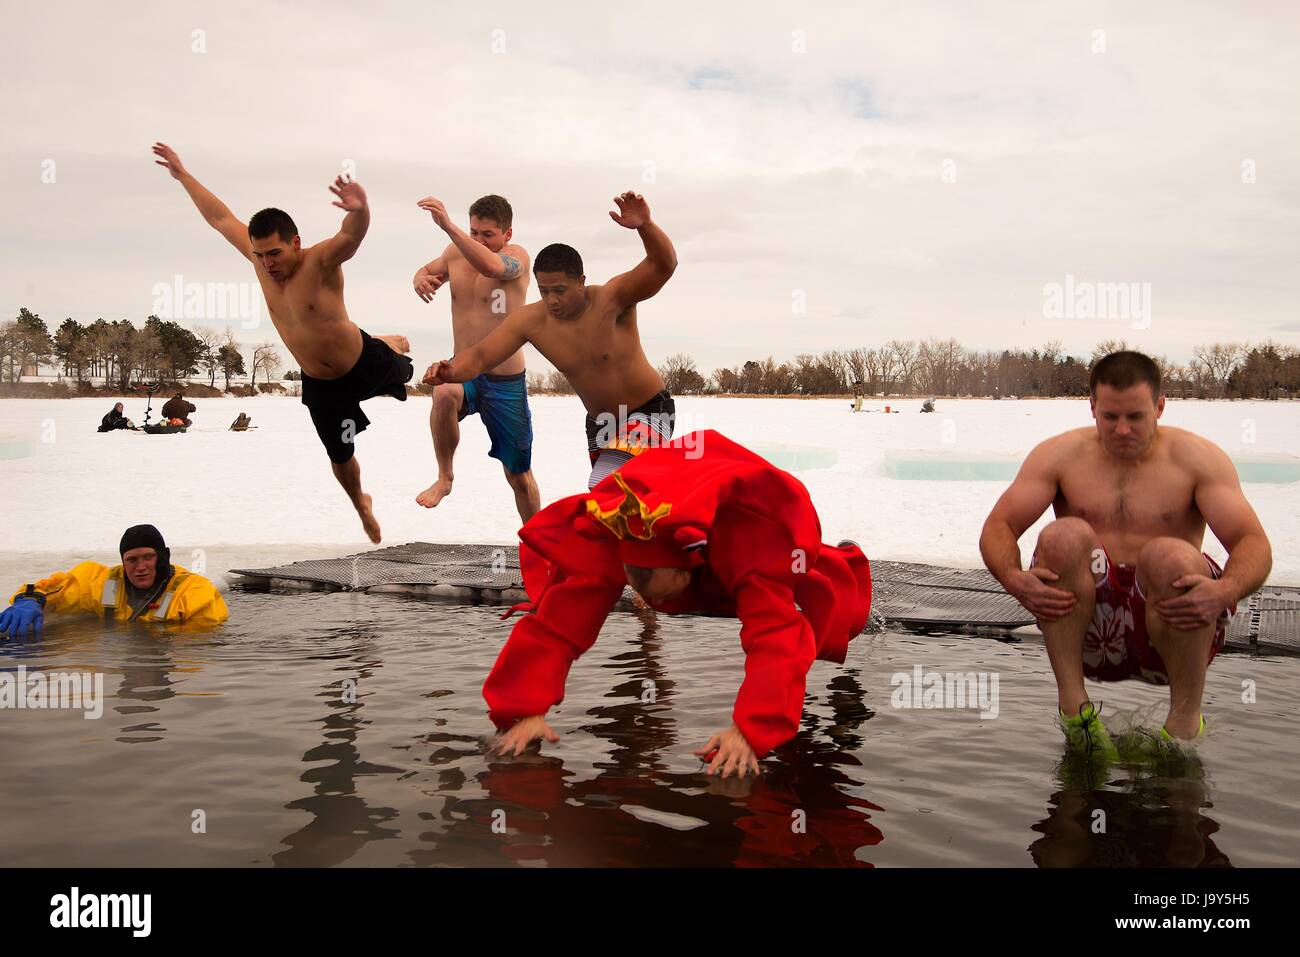 U.S. soldiers jump into icy Sloan Lake during the Matthew S. Schwartz Memorial Polar Plunge charity fundraiser event January 16, 2016 in Cheyenne, Wyoming.    (photo by R.J. Oriez /US Air Force  via Planetpix) Stock Photo